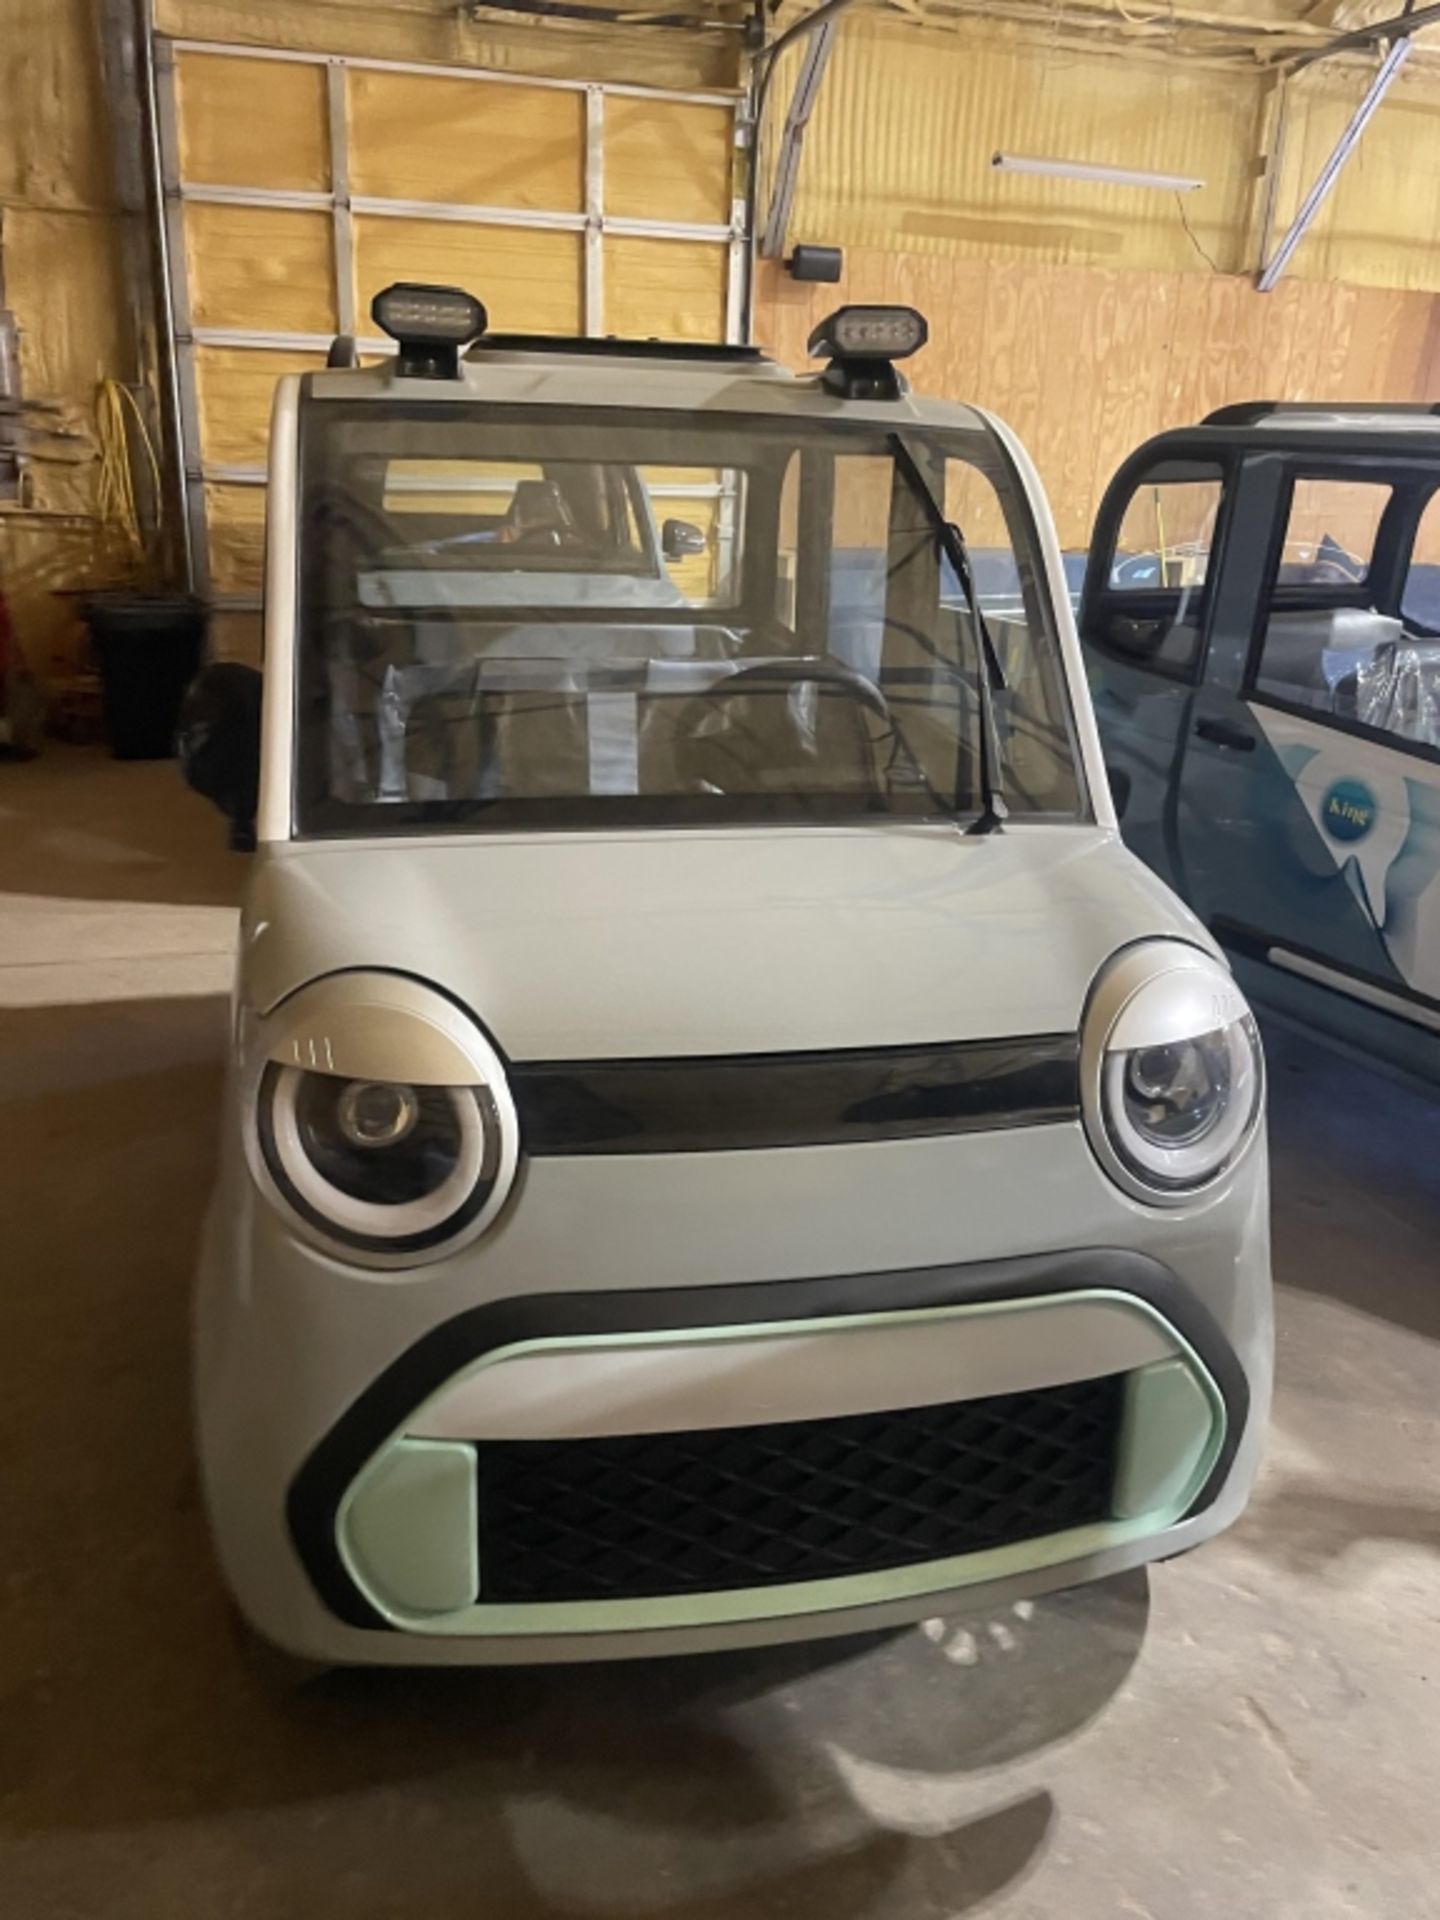 MECO M-F Electric Vehicle - Image 12 of 30